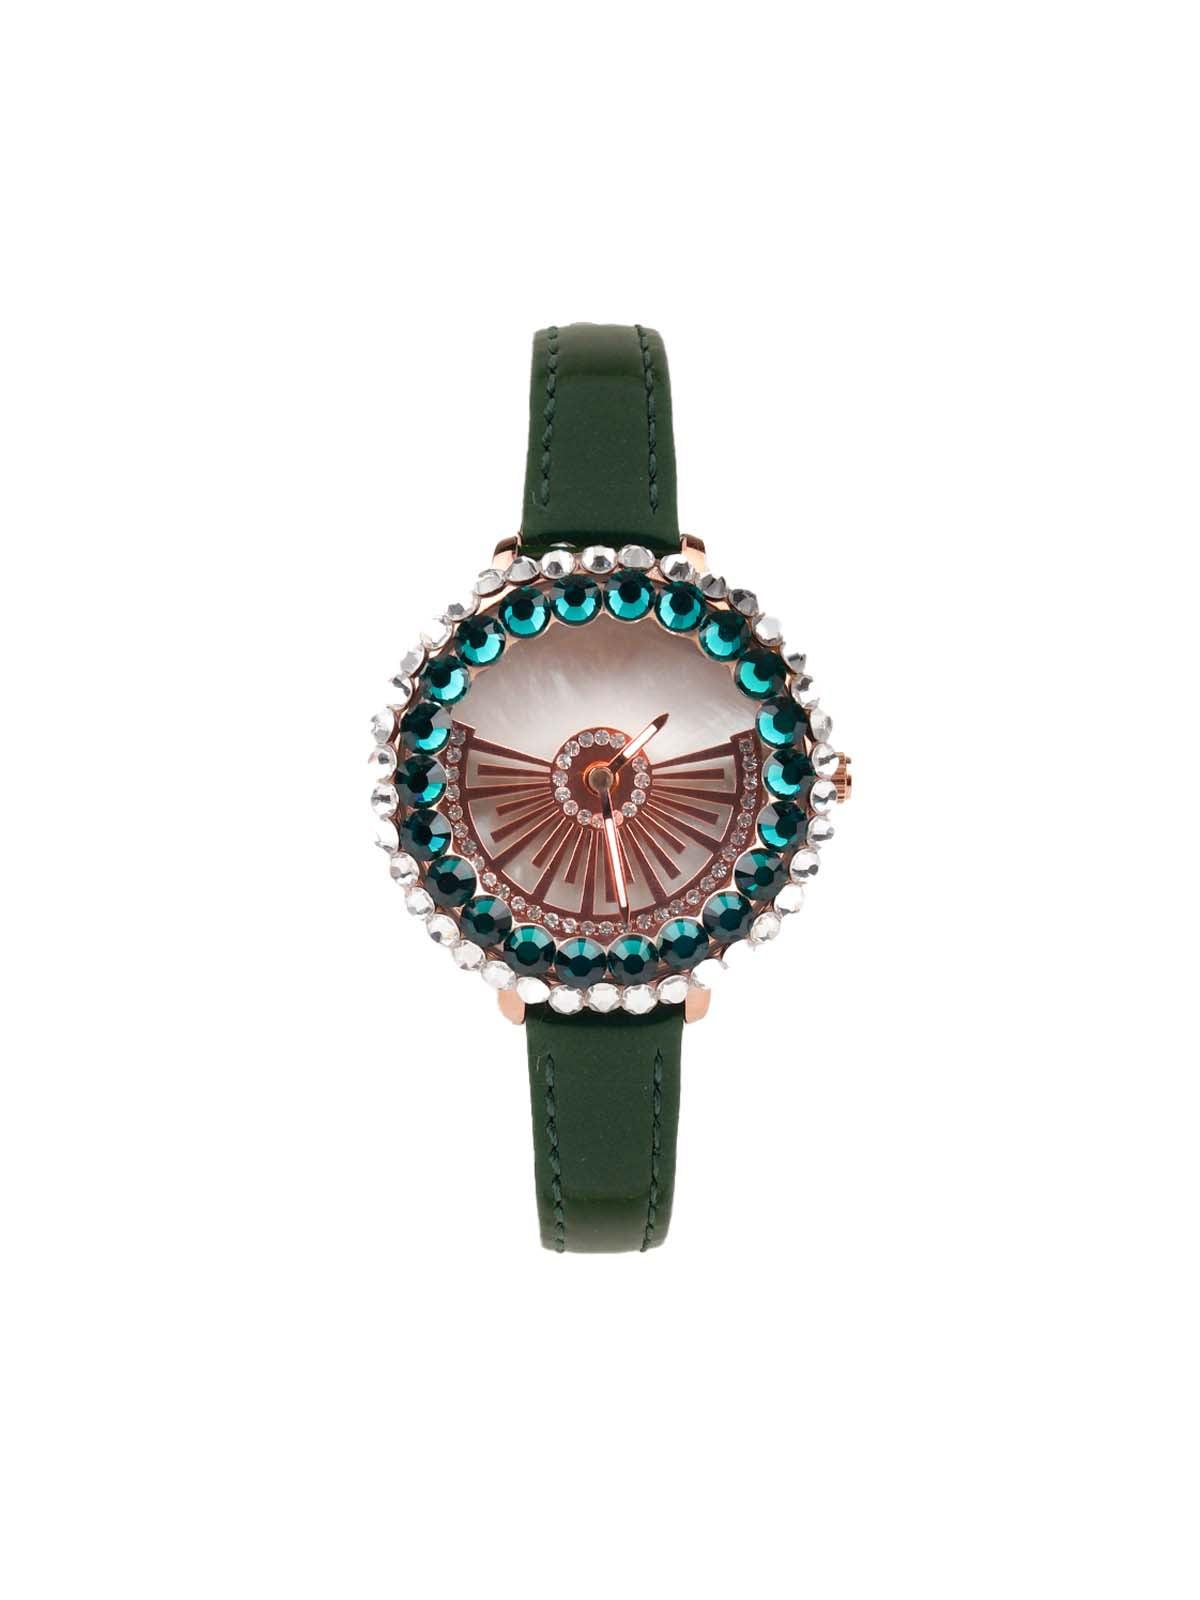 Olive green rounded dail elegant wrist watch for women - Odette